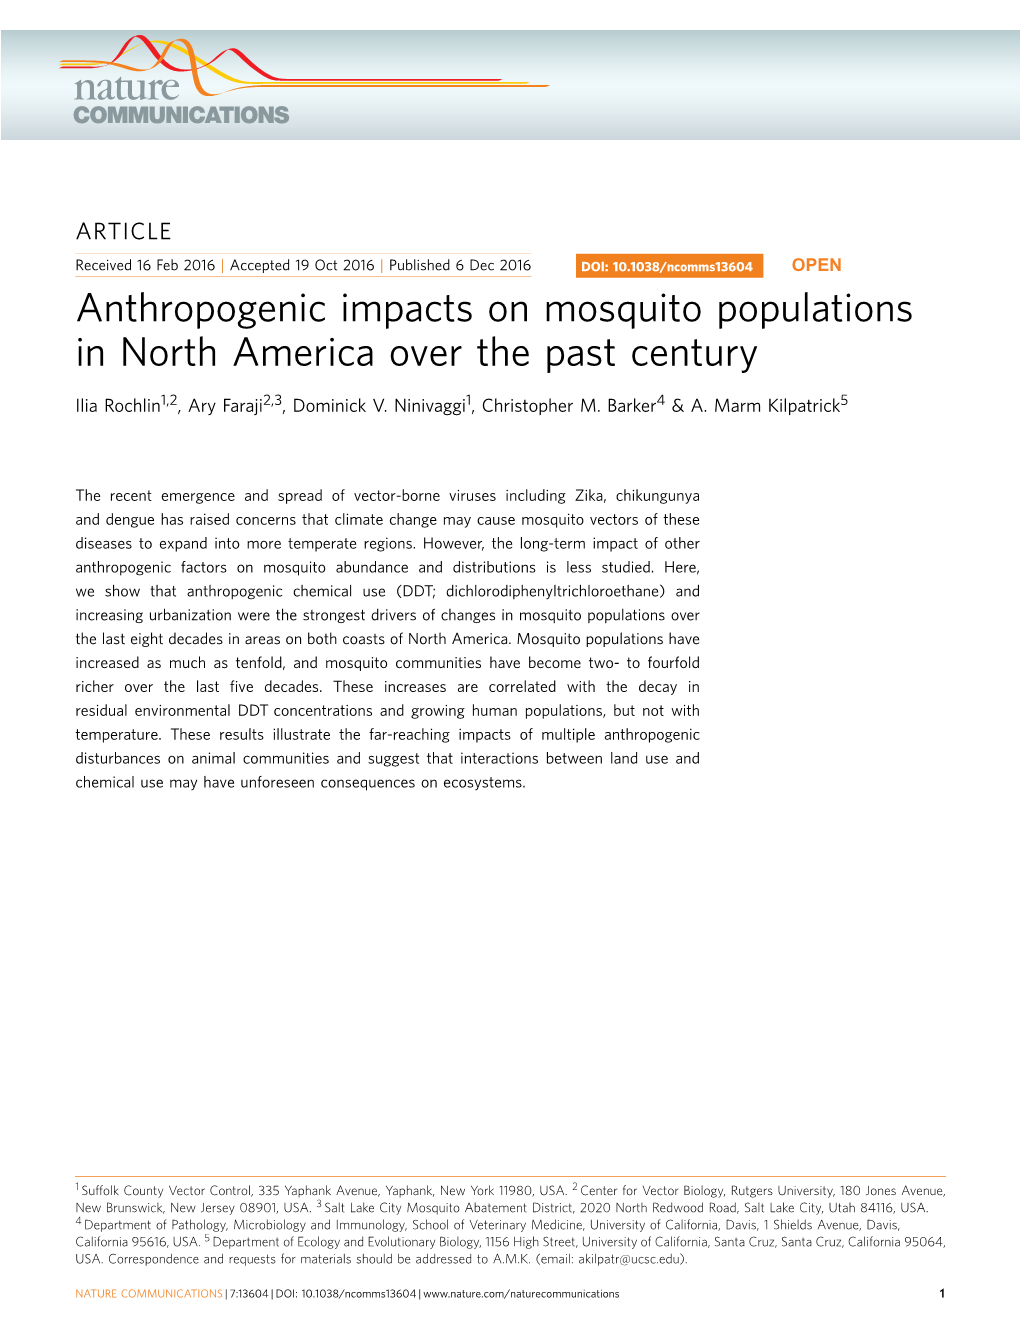 Anthropogenic Impacts on Mosquito Populations in North America Over the Past Century